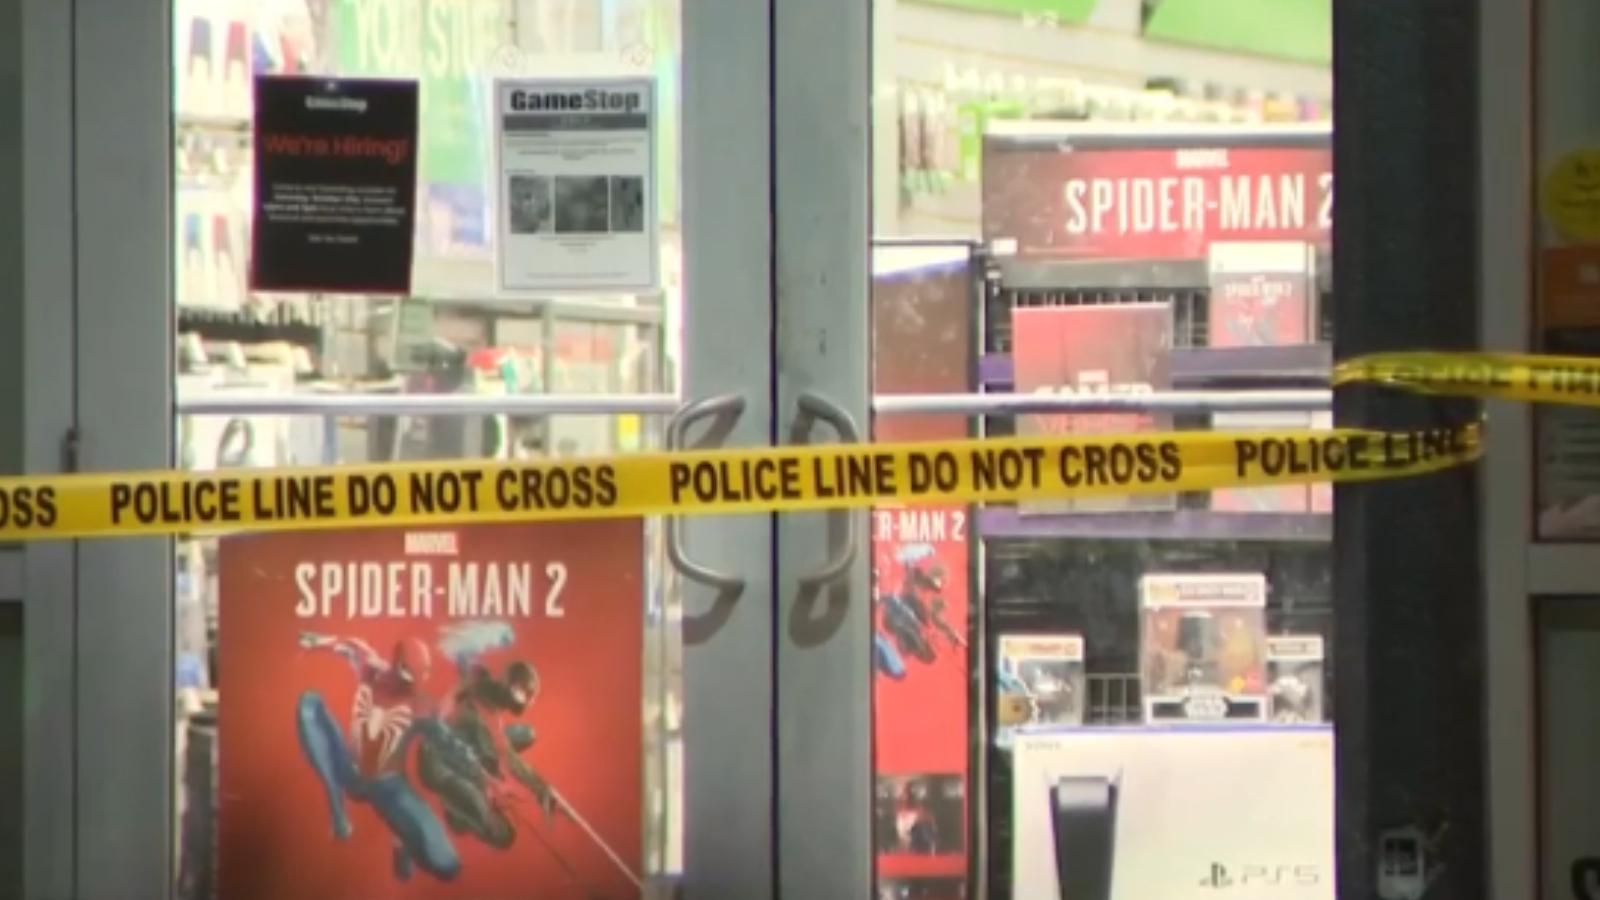 GameStop employee charged after fatally shooting customer stealing ...